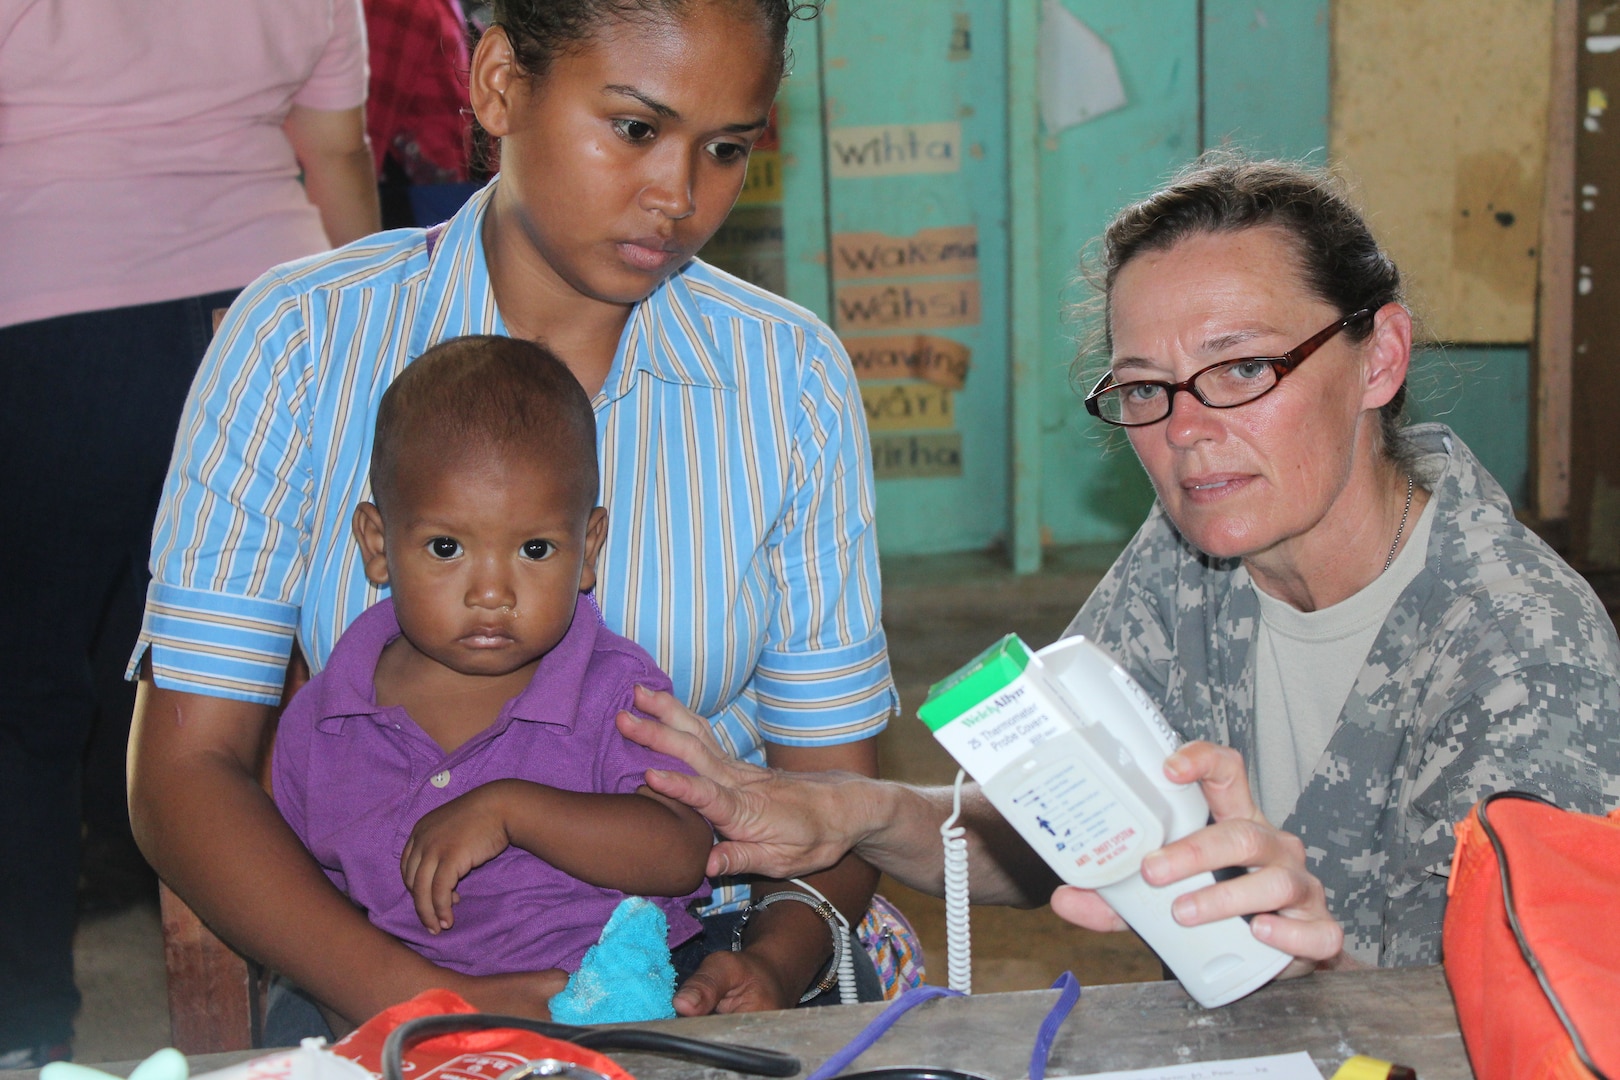 U.S. Army Capt. Penny Wood, a service member with Joint Task Force-Bravo’s Medical Element, checks a child’s temperature during a Medical Readiness Training Exercise in Nueva Jerusalén, Gracias a Dios Department, Honduras, Jan. 28, 2016. For many mothers, these medical exercises between the U.S. and Honduras are the only opportunity for their children to receive medical attention since health care is limited in the remote region. (U.S. Army photo by Maria Pinel/Released)